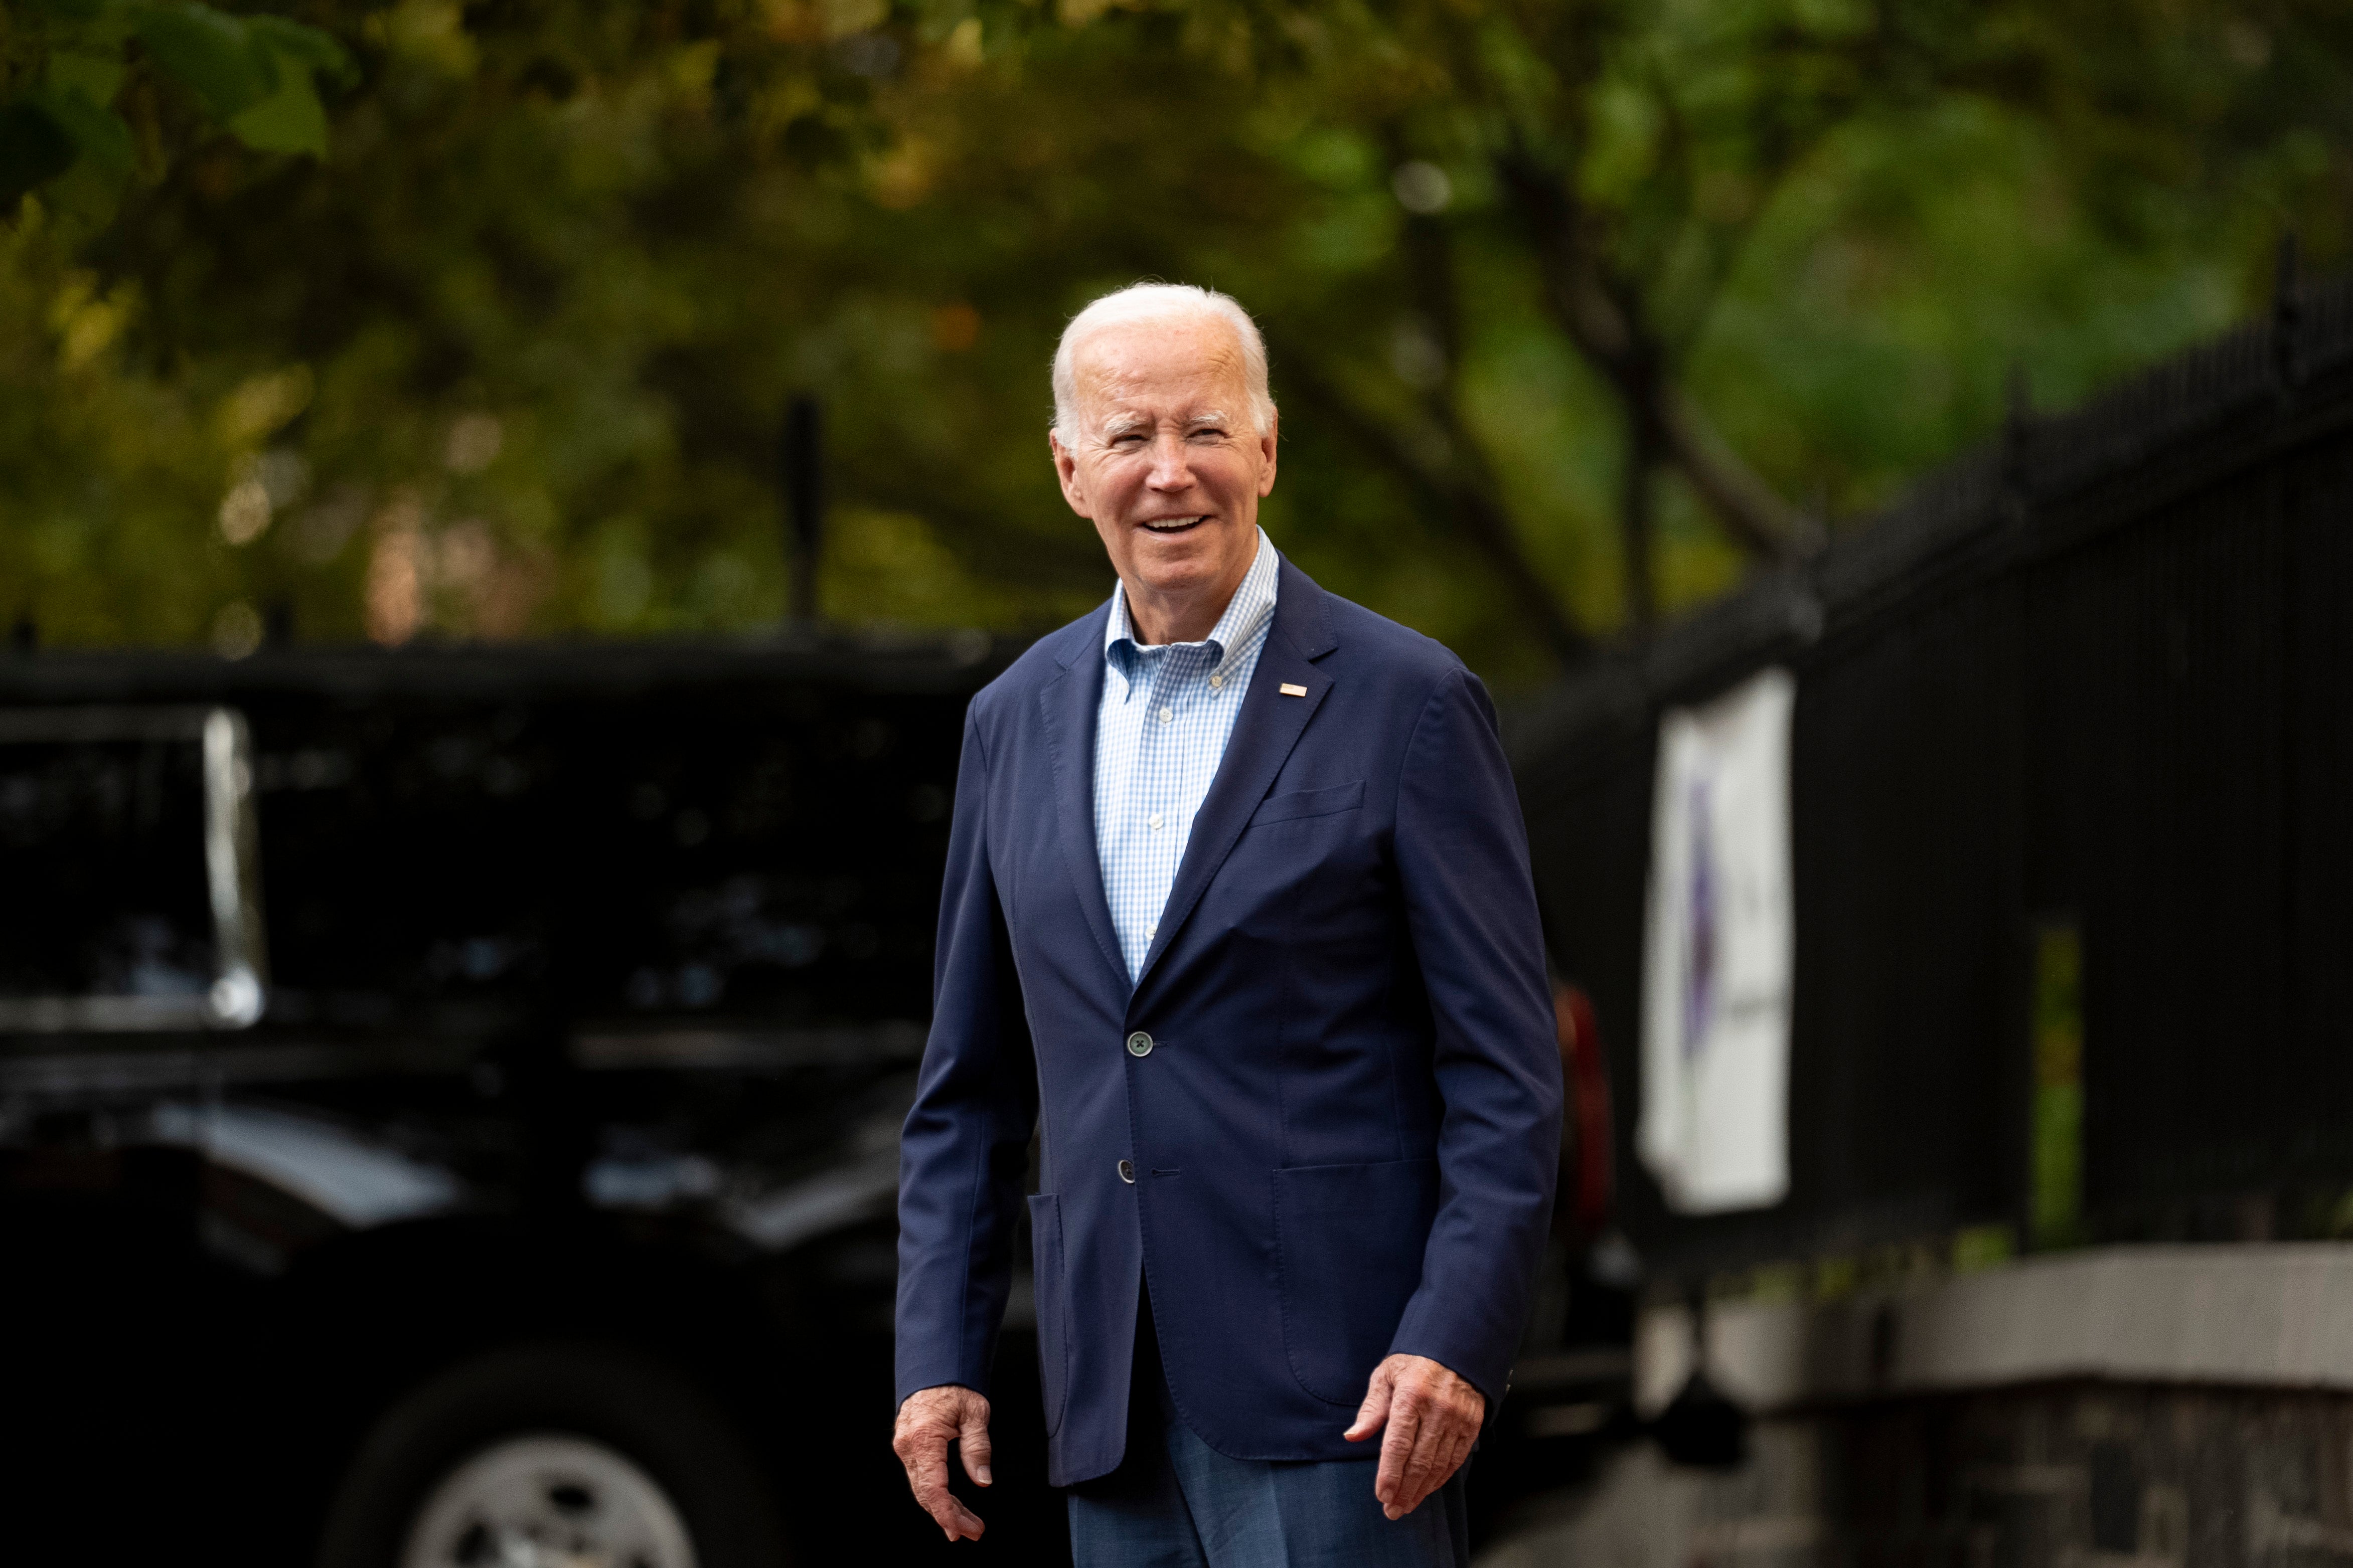 Overwhelming majority of Americans say Biden is too old to be effective in a second term, poll finds